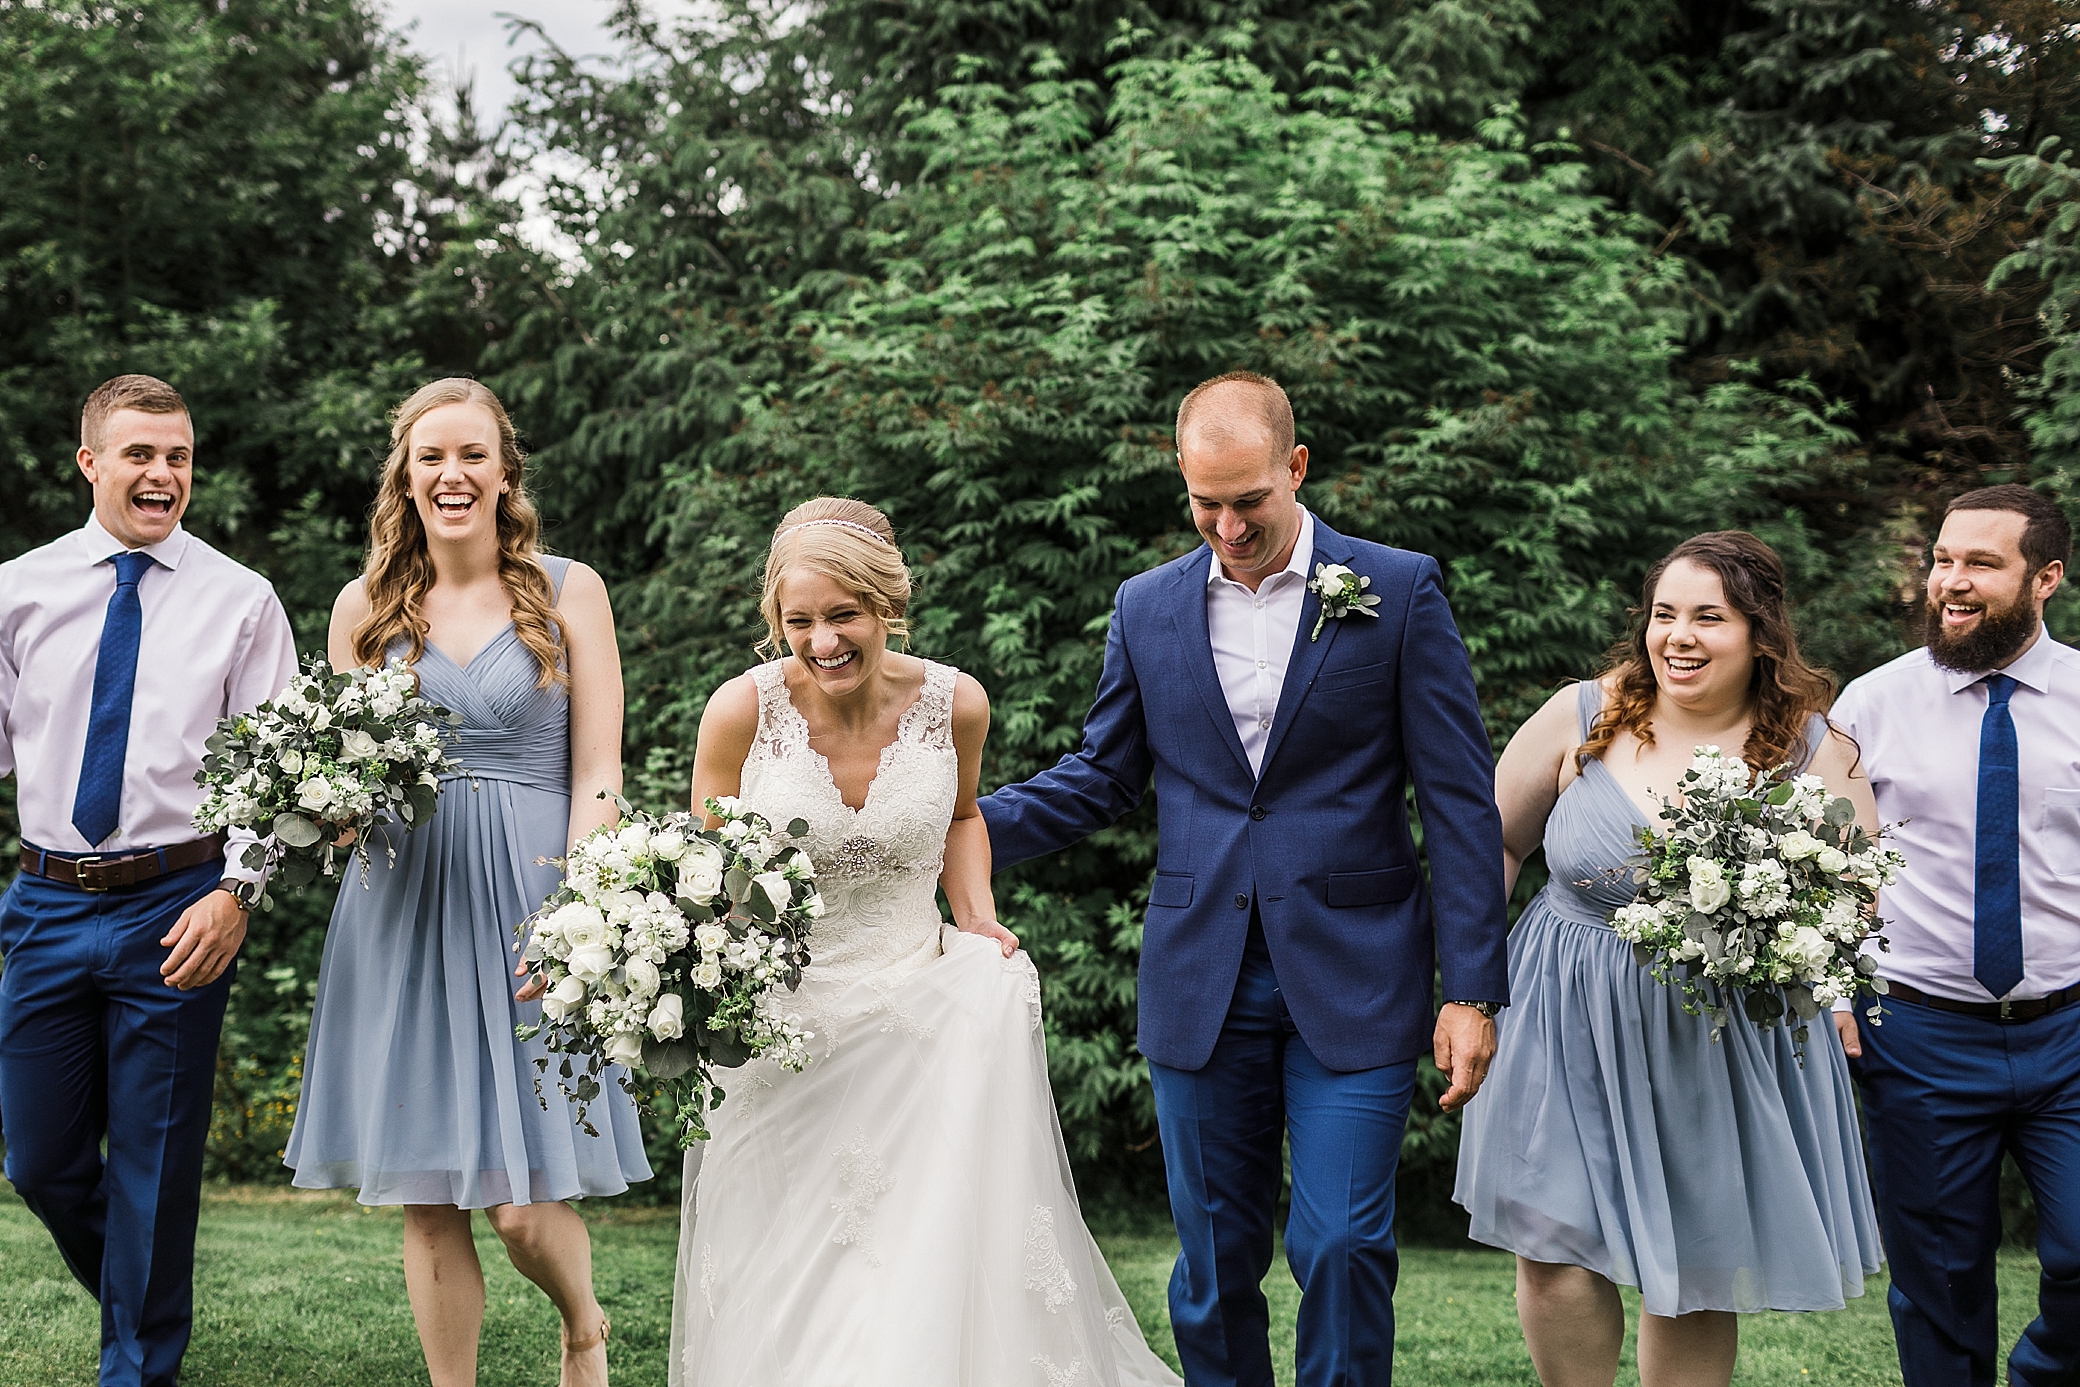 Bride and groom with wedding party | Megan Montalvo Photography 